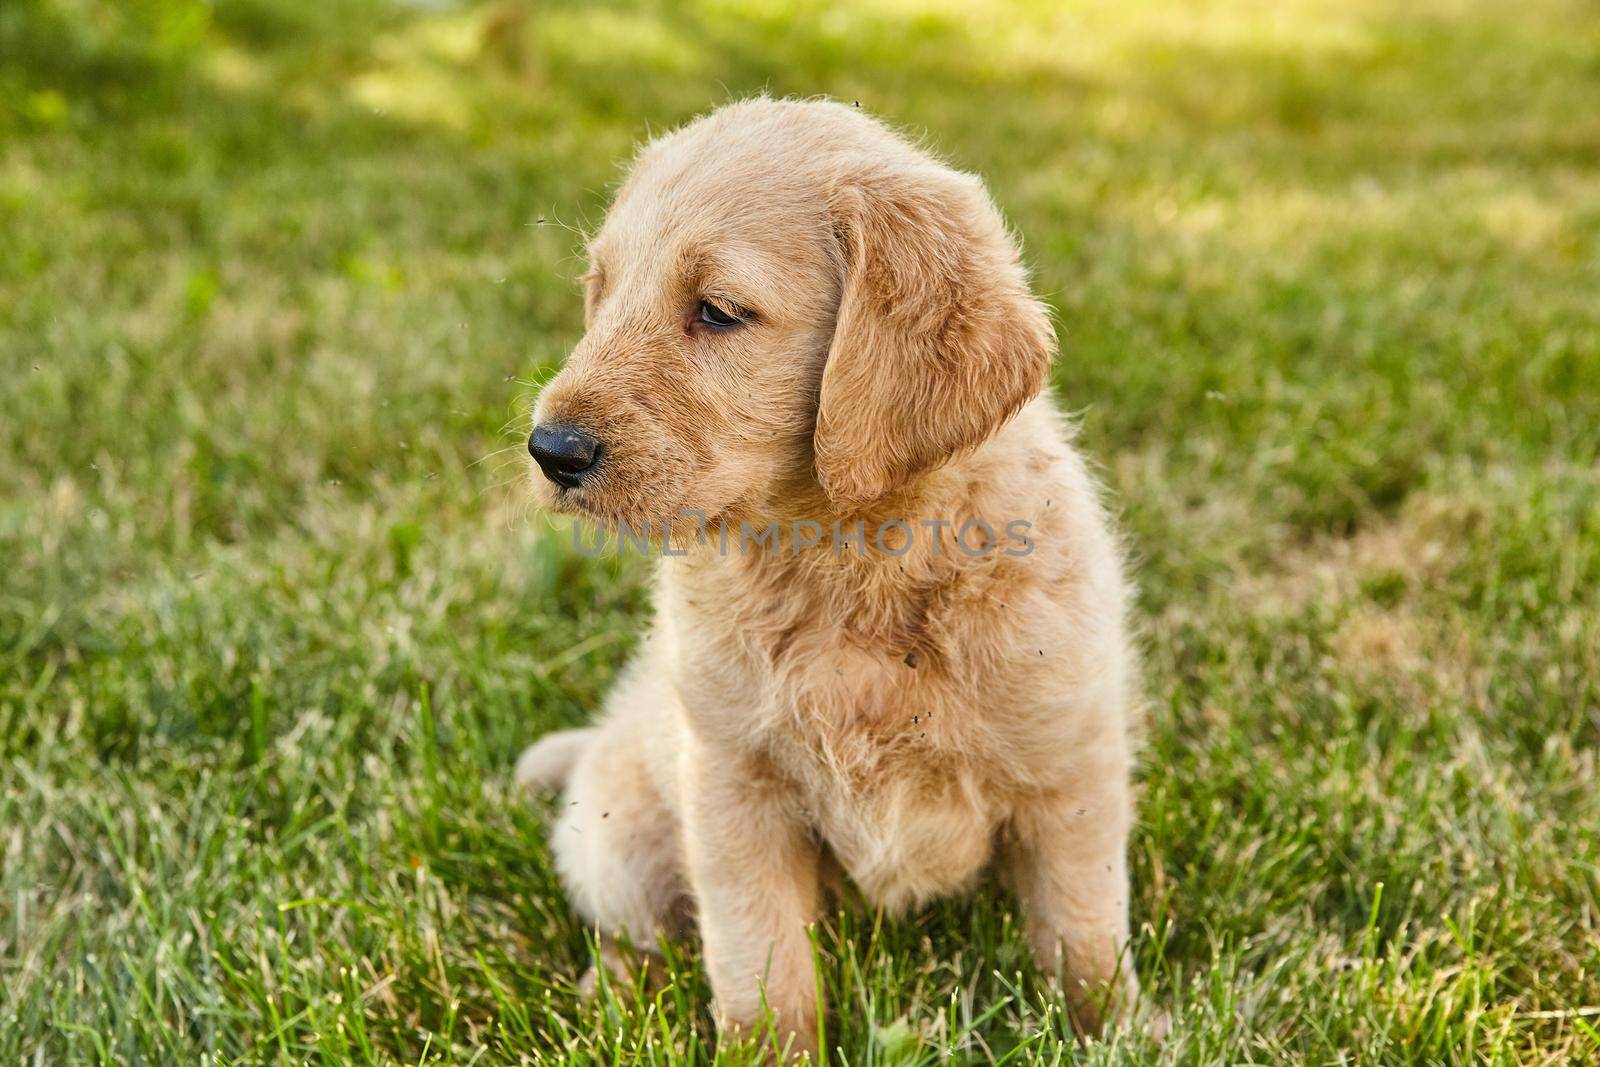 Image of Cute Labradoodle puppy sitting in grass